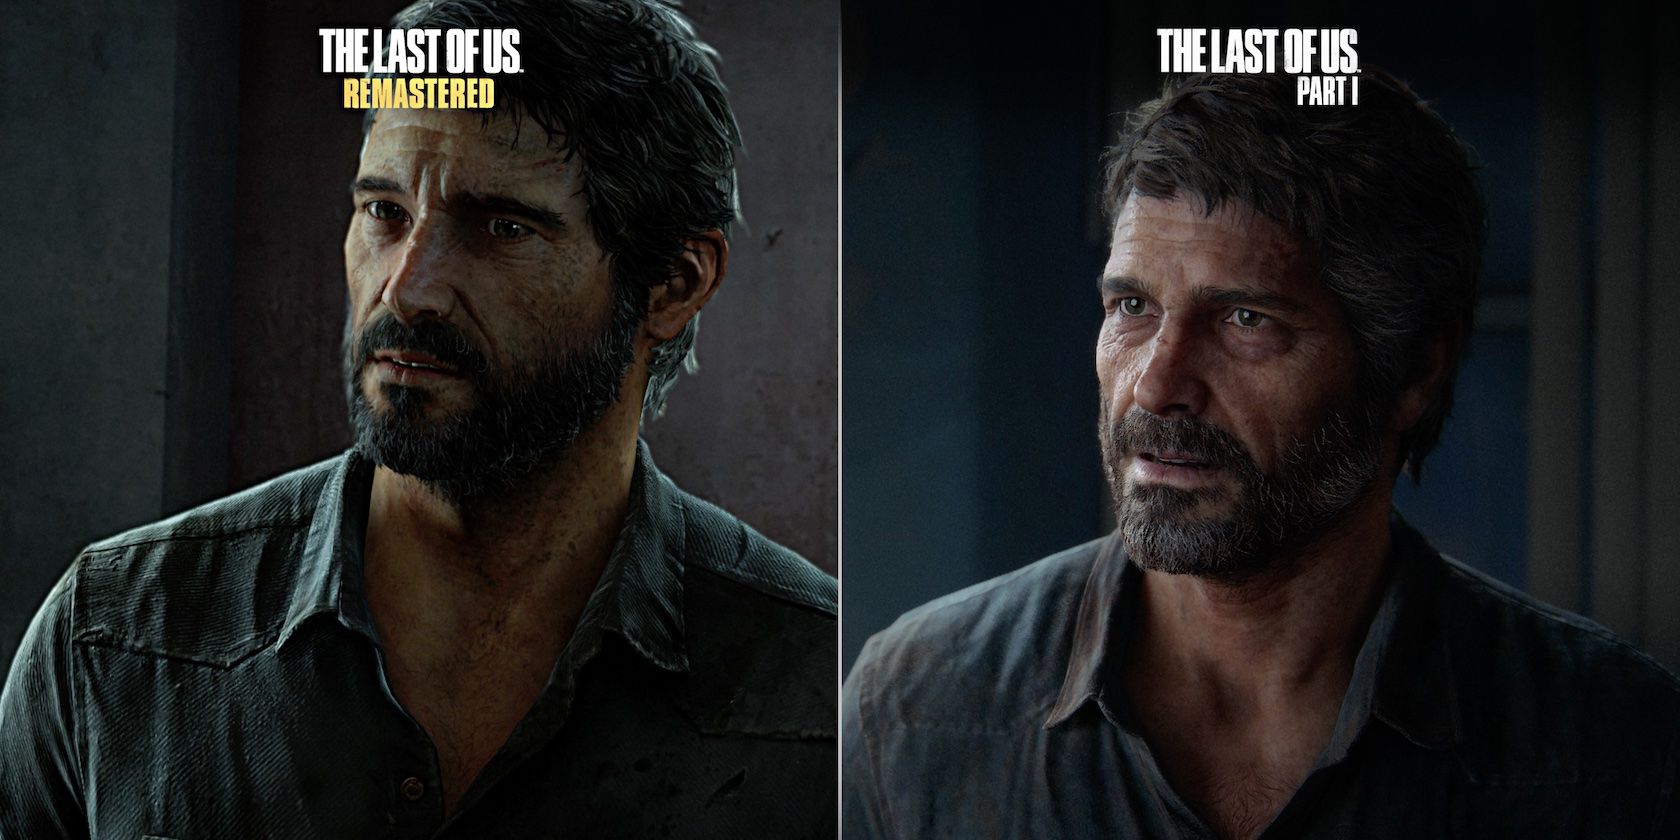 The Last of Us Part 1 Means Much More on PC Than It Does On PS5